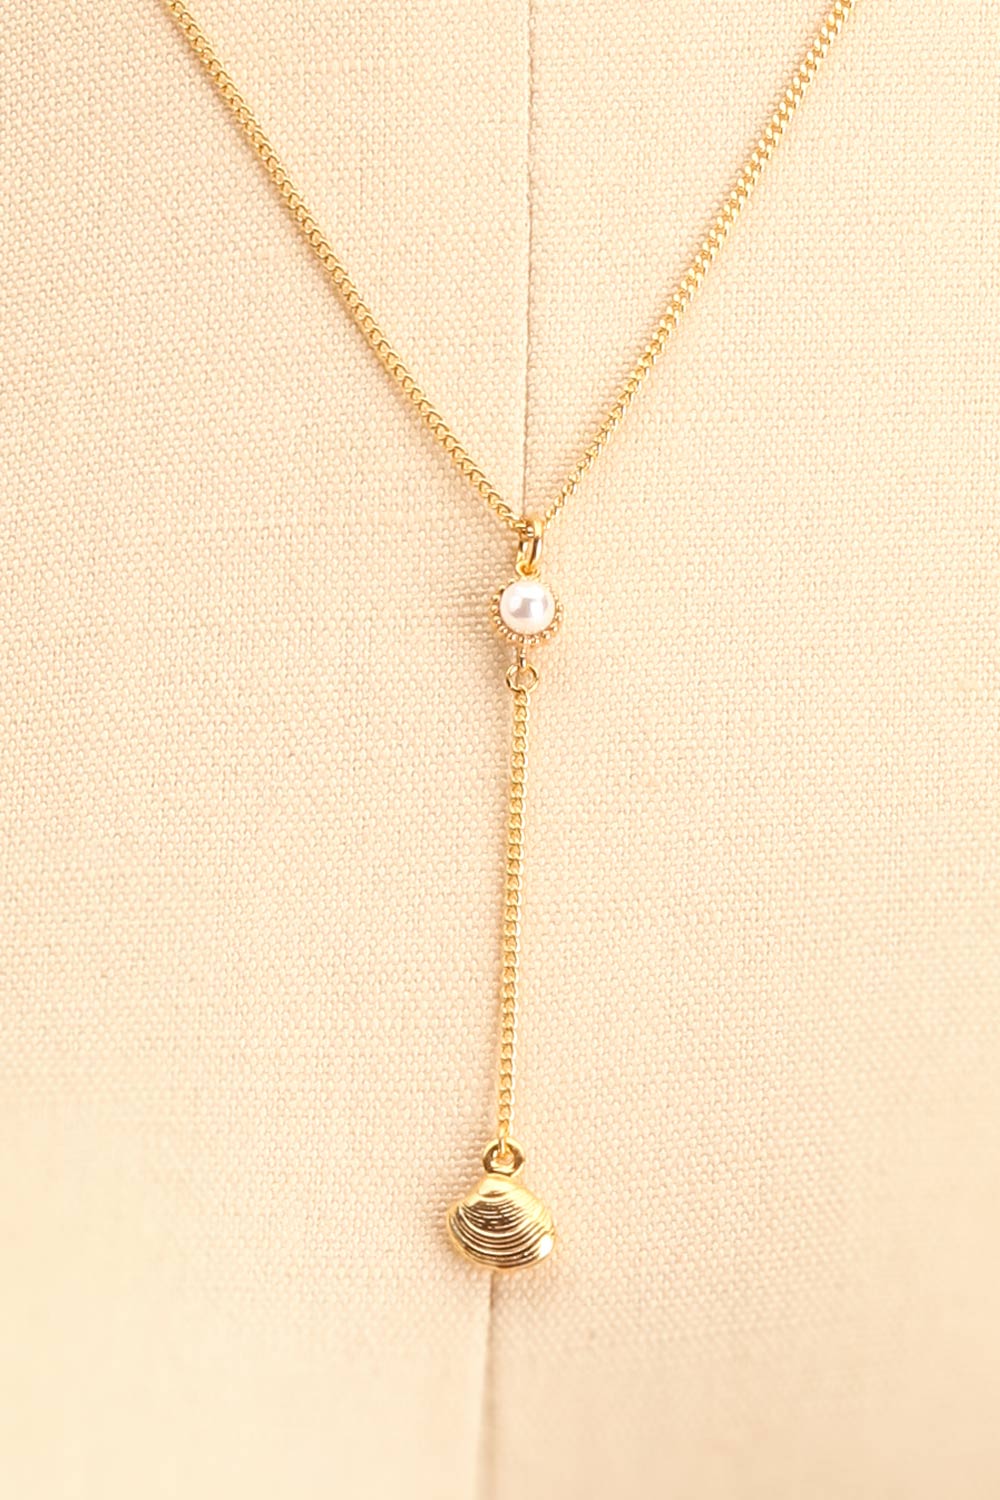 Mary Nolan Dainty Golden Pendant Necklace with Pearl | Boutique 1861 4